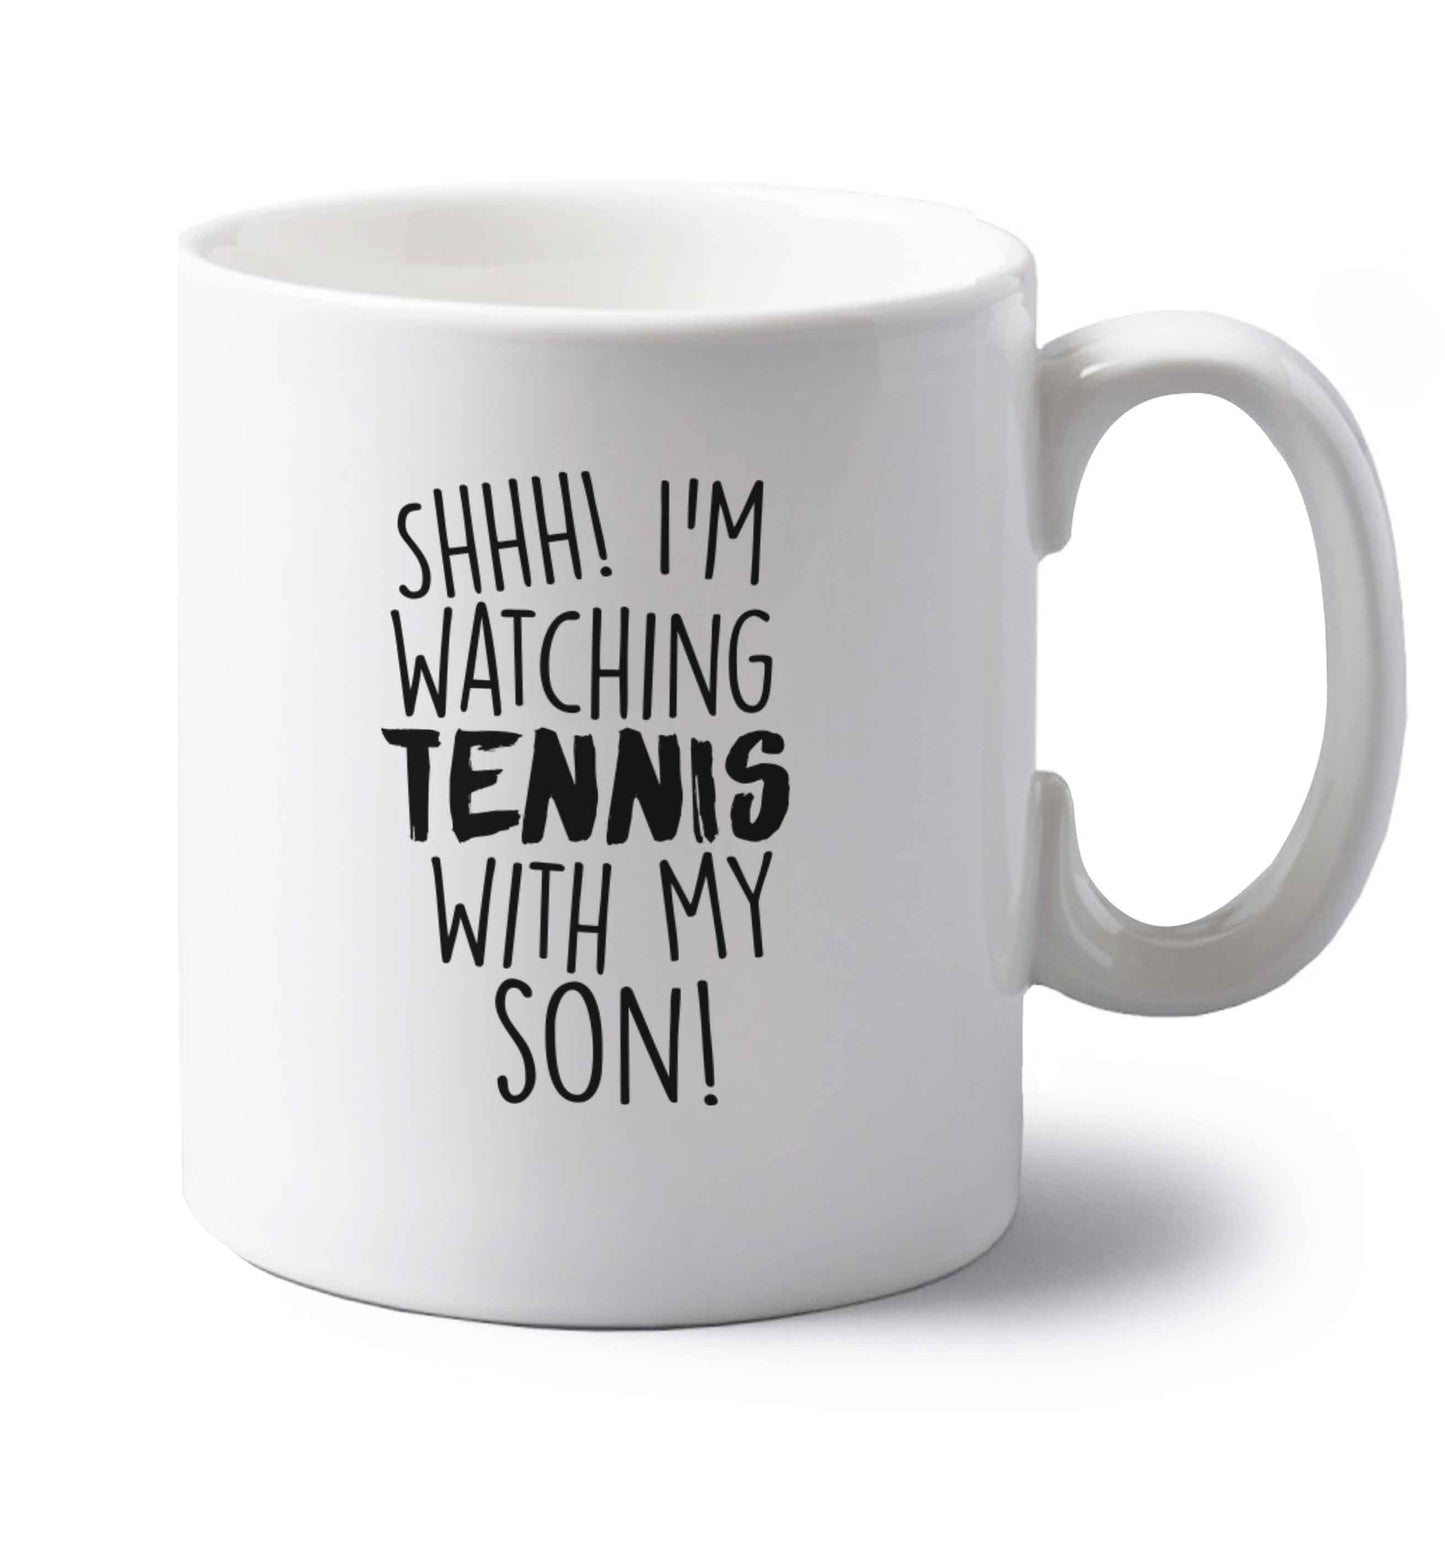 Shh! I'm watching tennis with my son! left handed white ceramic mug 